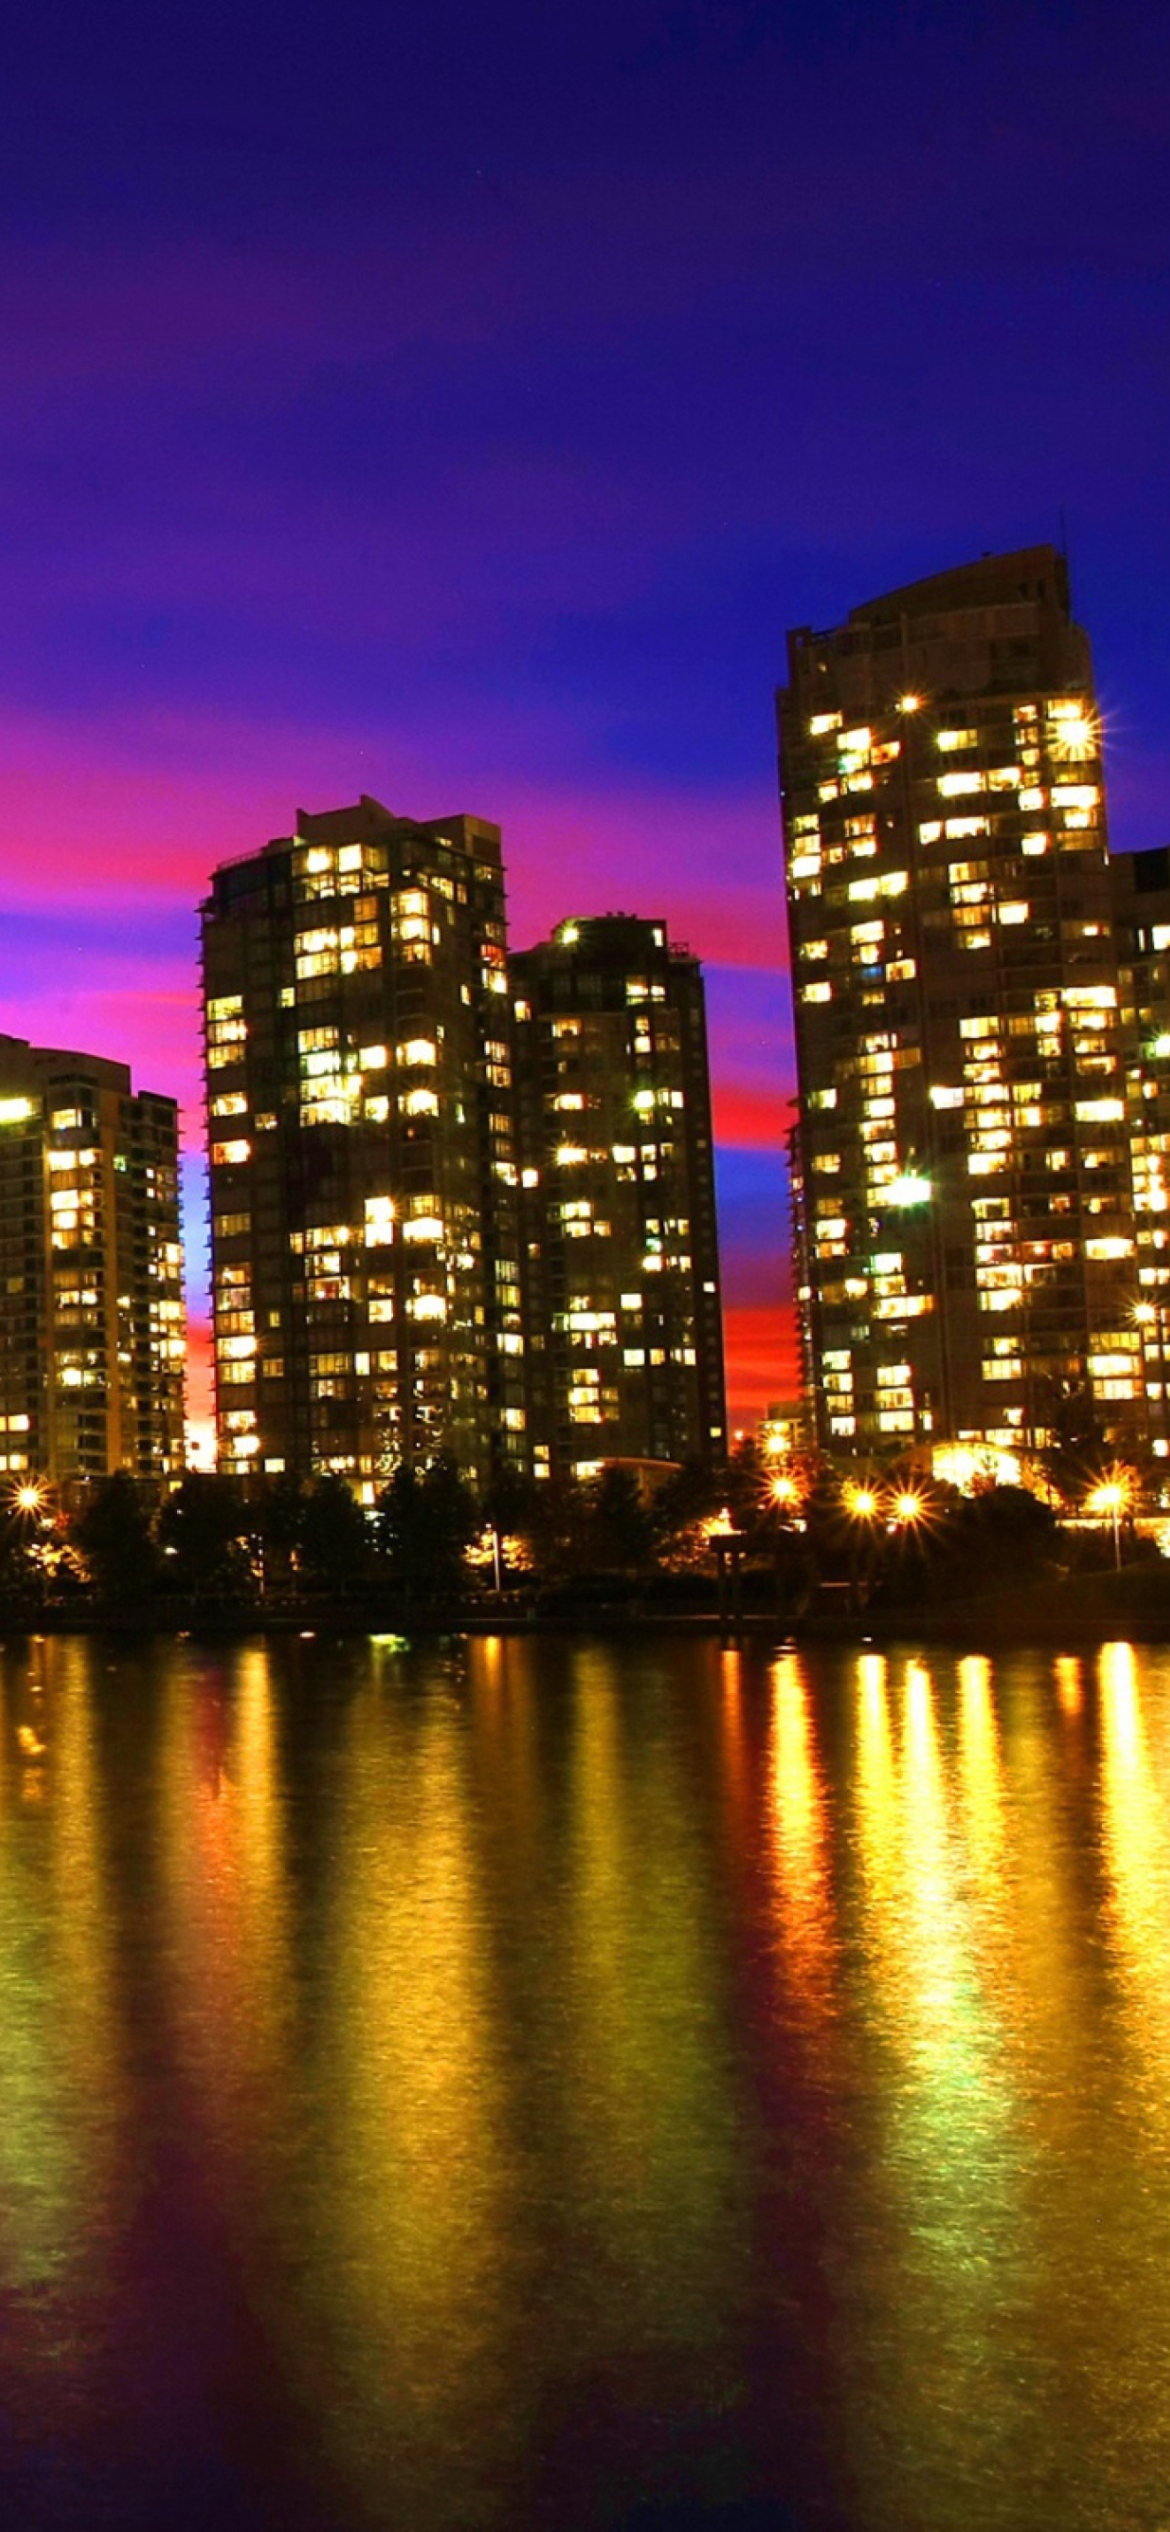 Vancouver Sunset Canada wallpaper 1170x2532